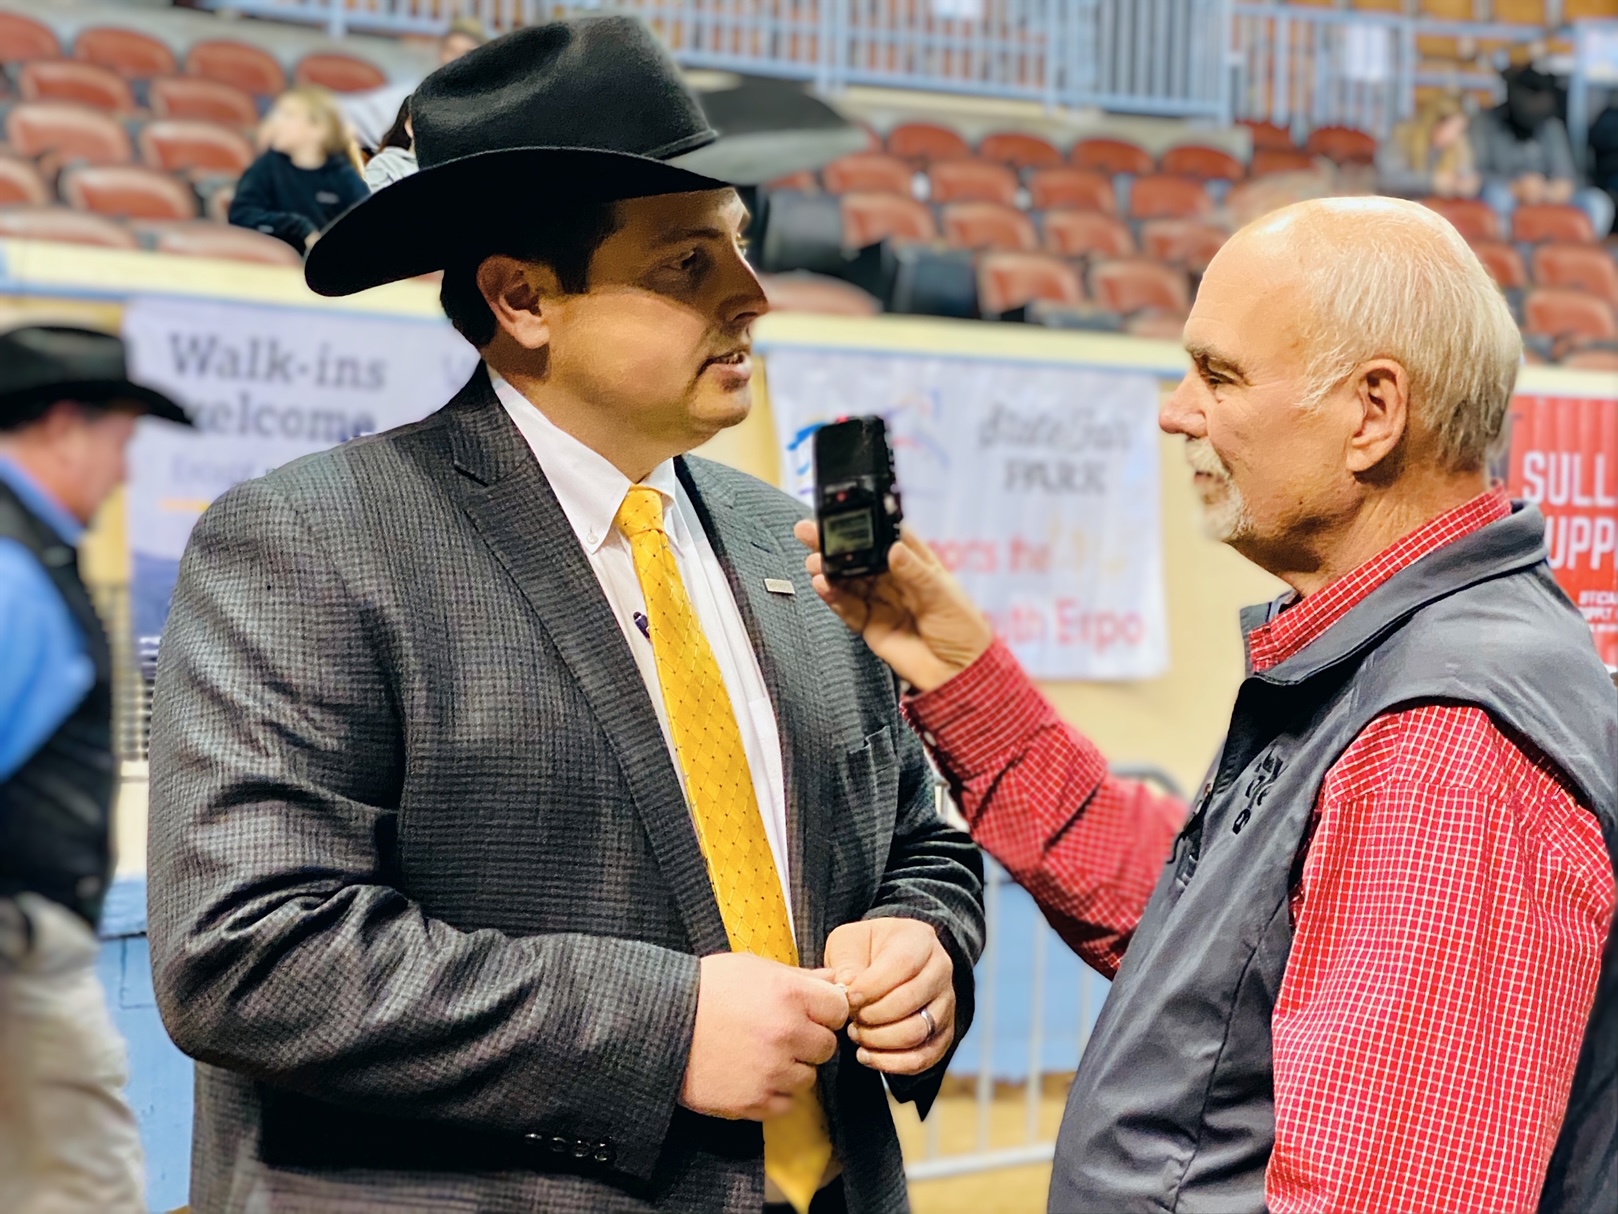 Oklahoma City's Central Location Helped Breed Association's Pivot Quickly When Denver Canceled, Says Shane Bedwell, American Hereford Association